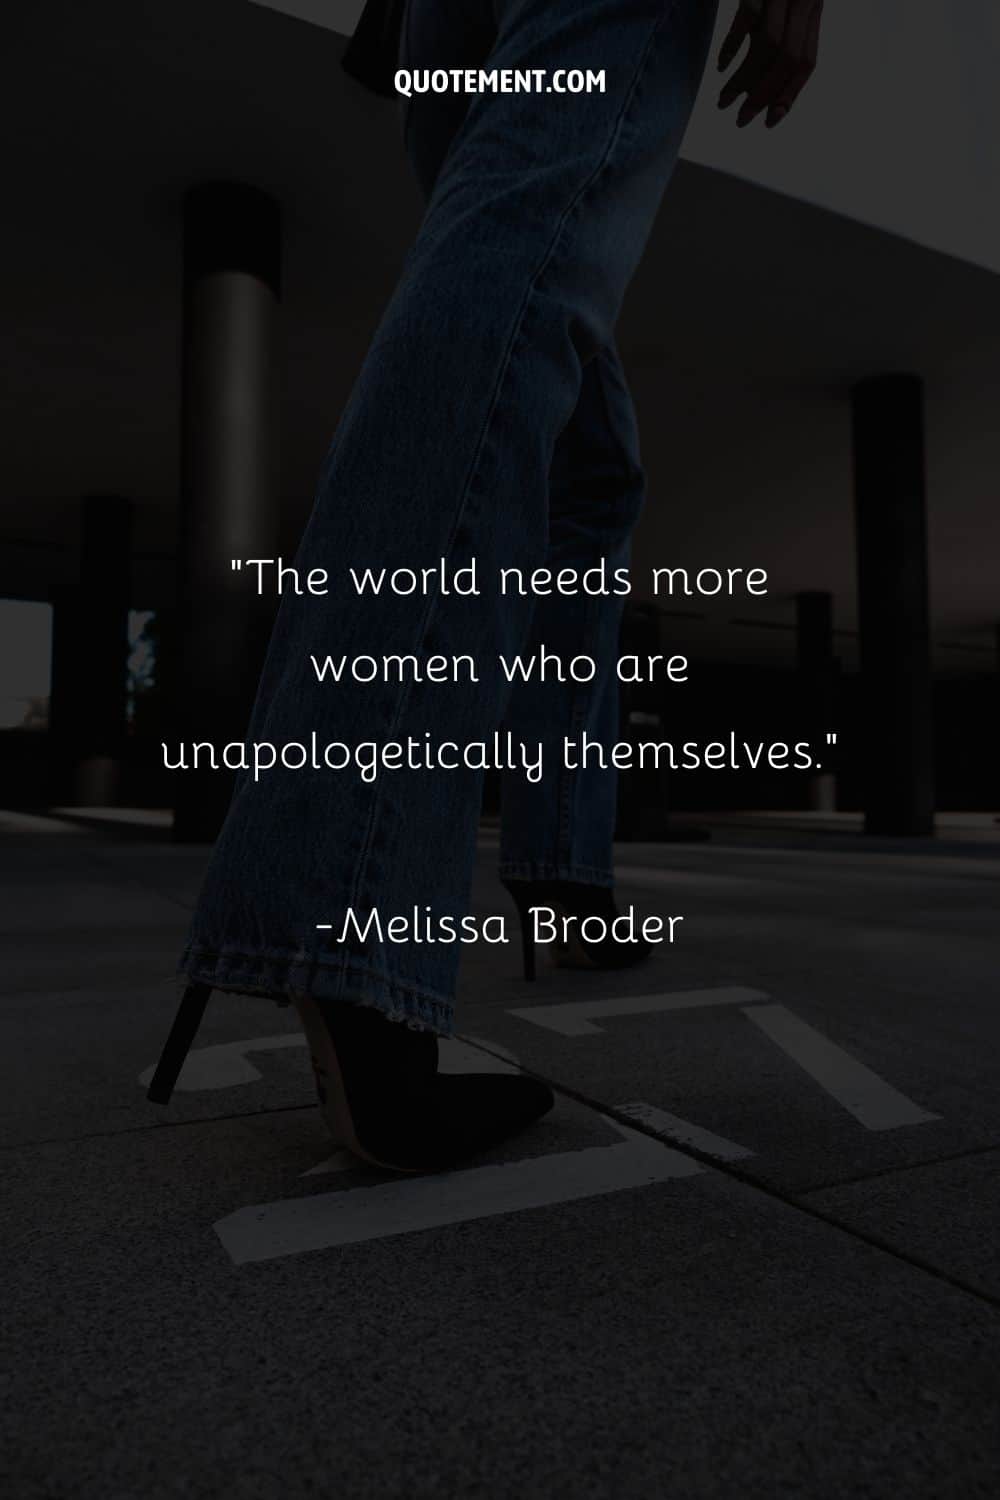 Image of a woman in jeans and high heels representing girl quote for Instagram.